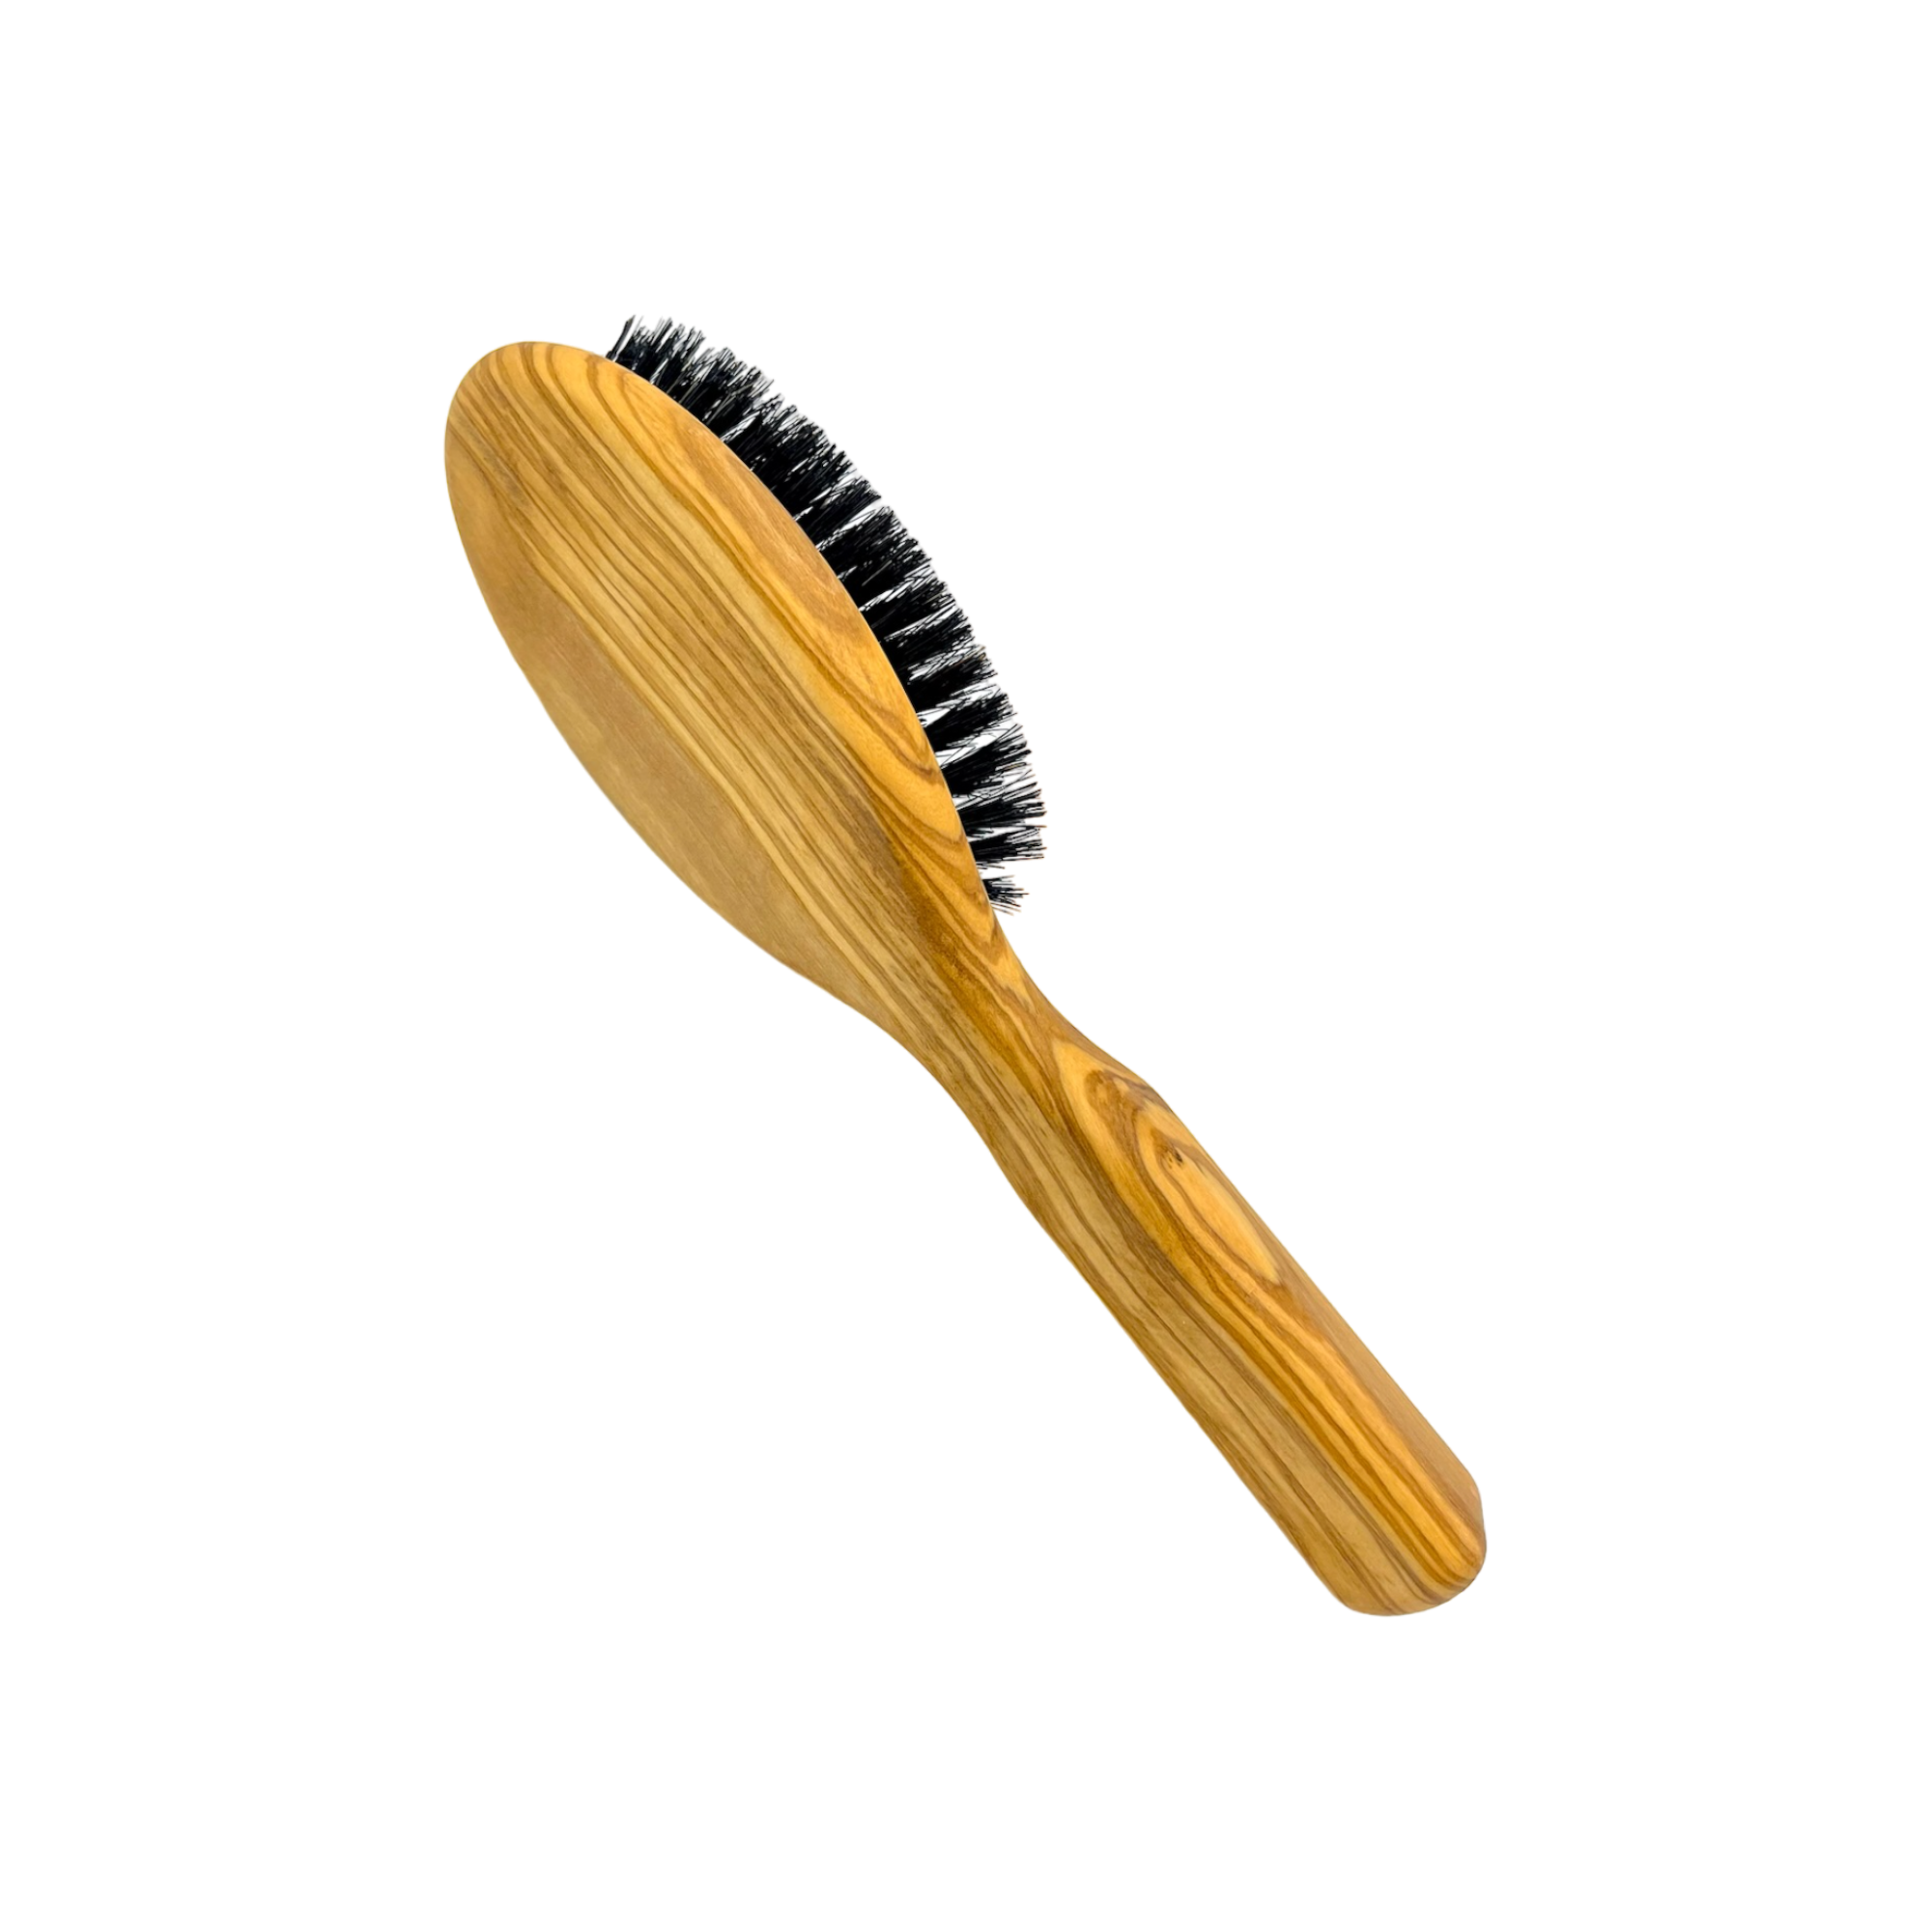 Dural Olive wood rubber cushion hair brush with boar bristles